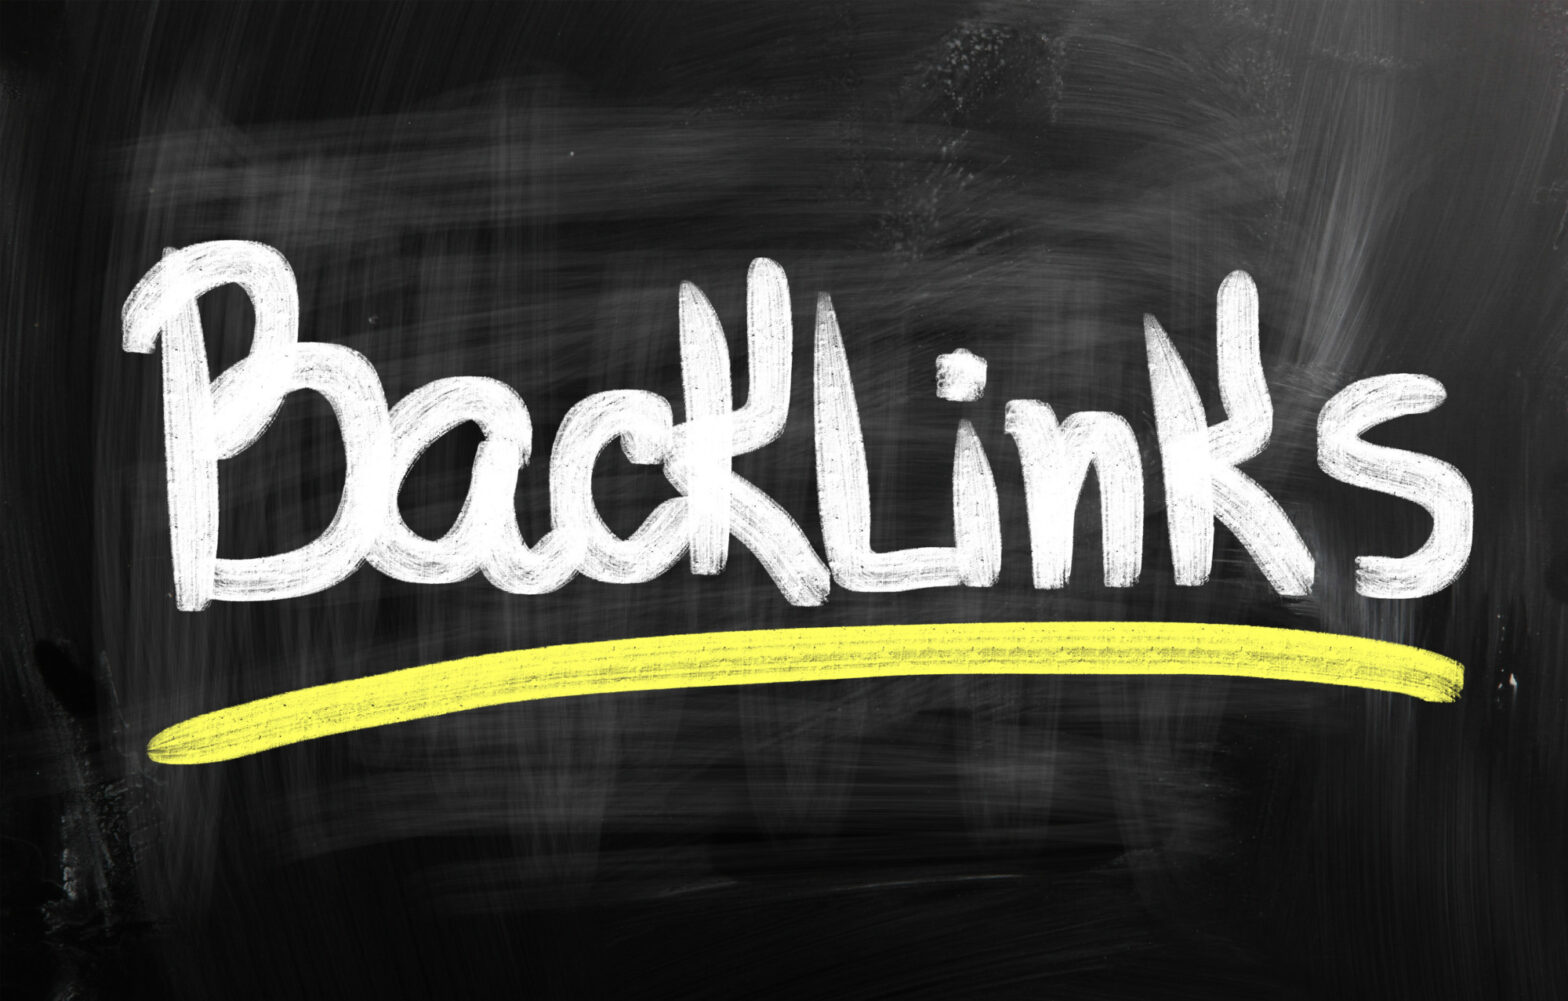 Image of backlink text